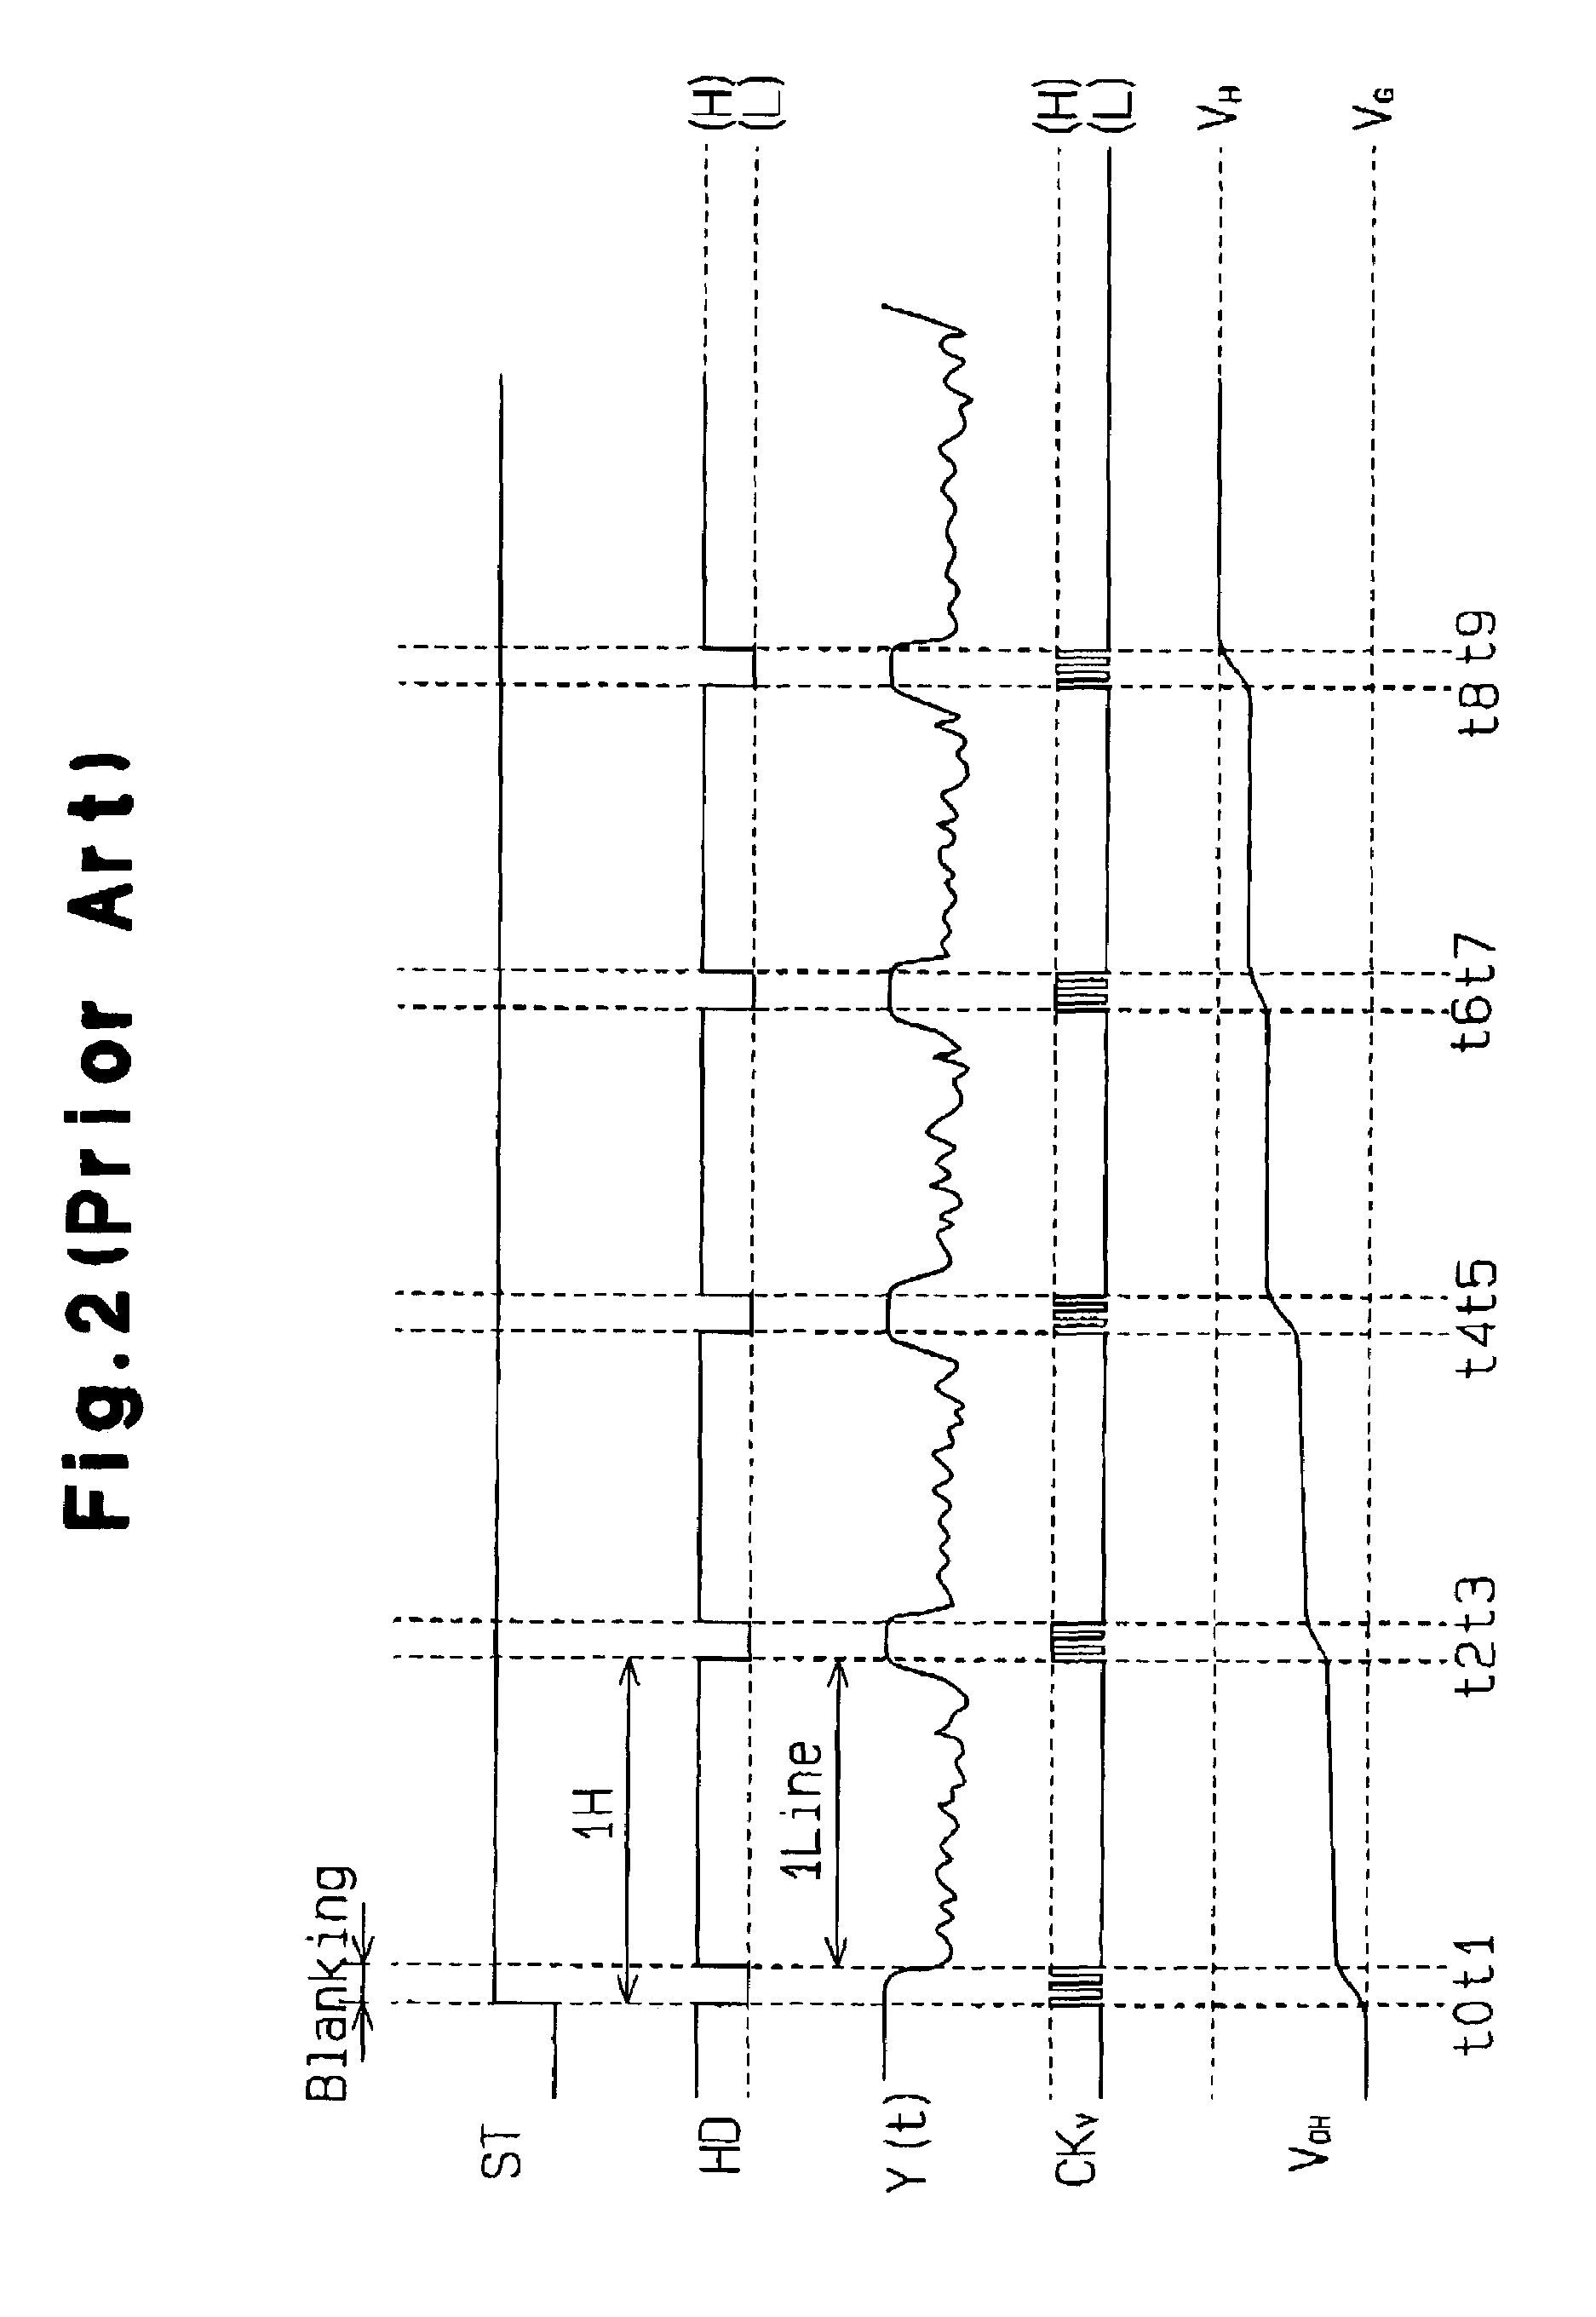 Imaging device with boosting circuit